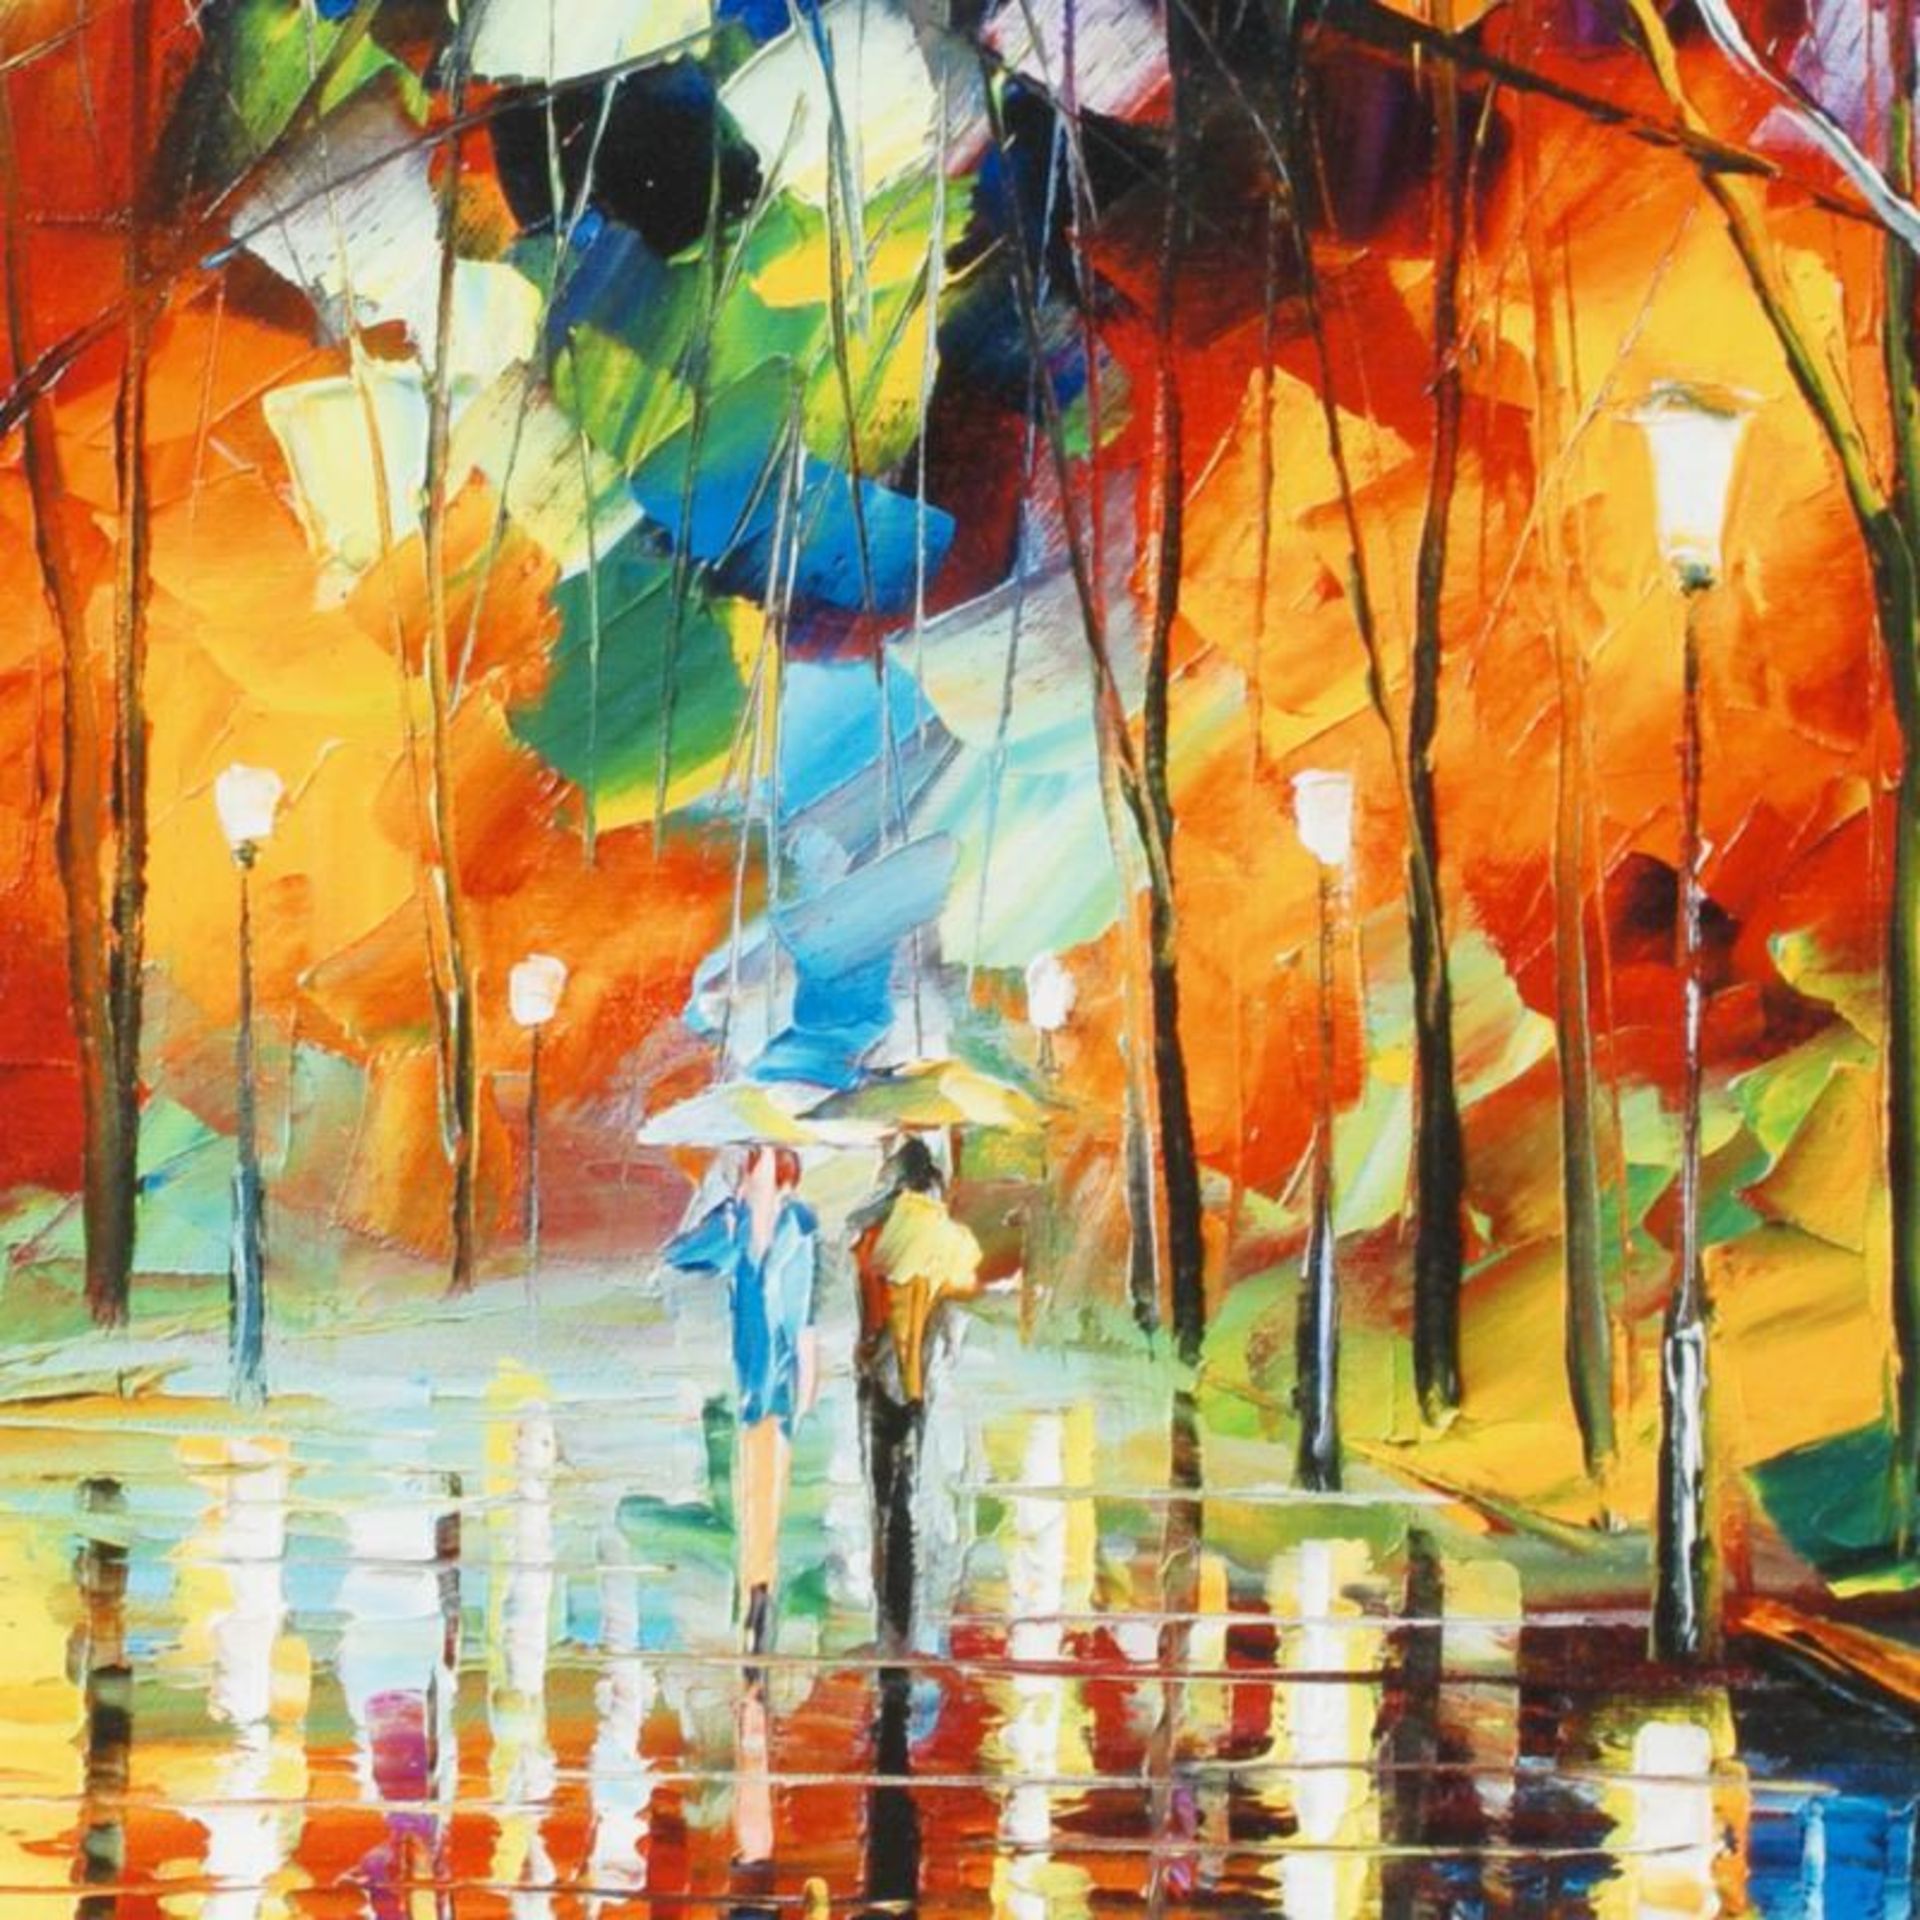 Mirror Streets by Afremov (1955-2019) - Image 2 of 3